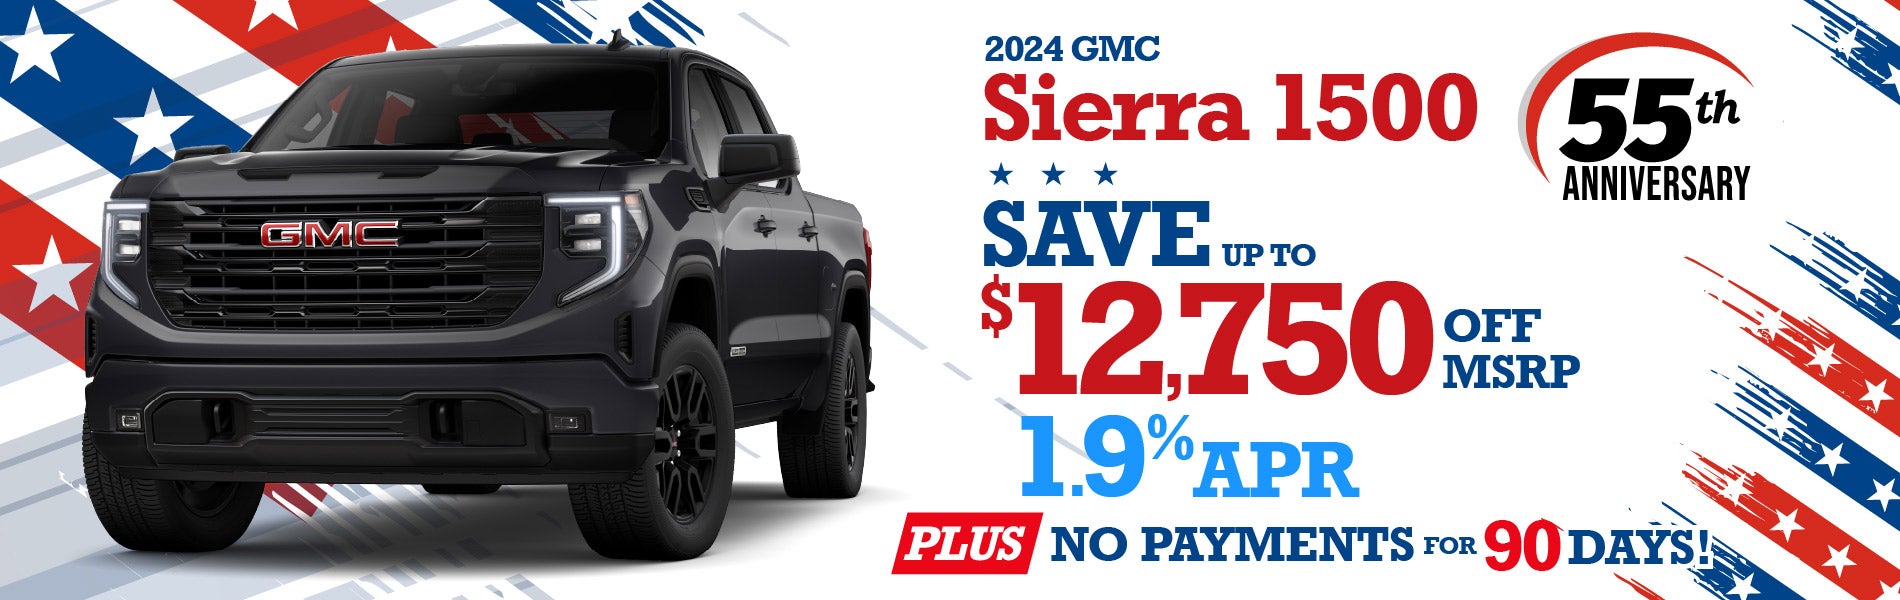 2024 GMC Sierra 1500 - SAVE up to $12,750 or 1.9% A{R